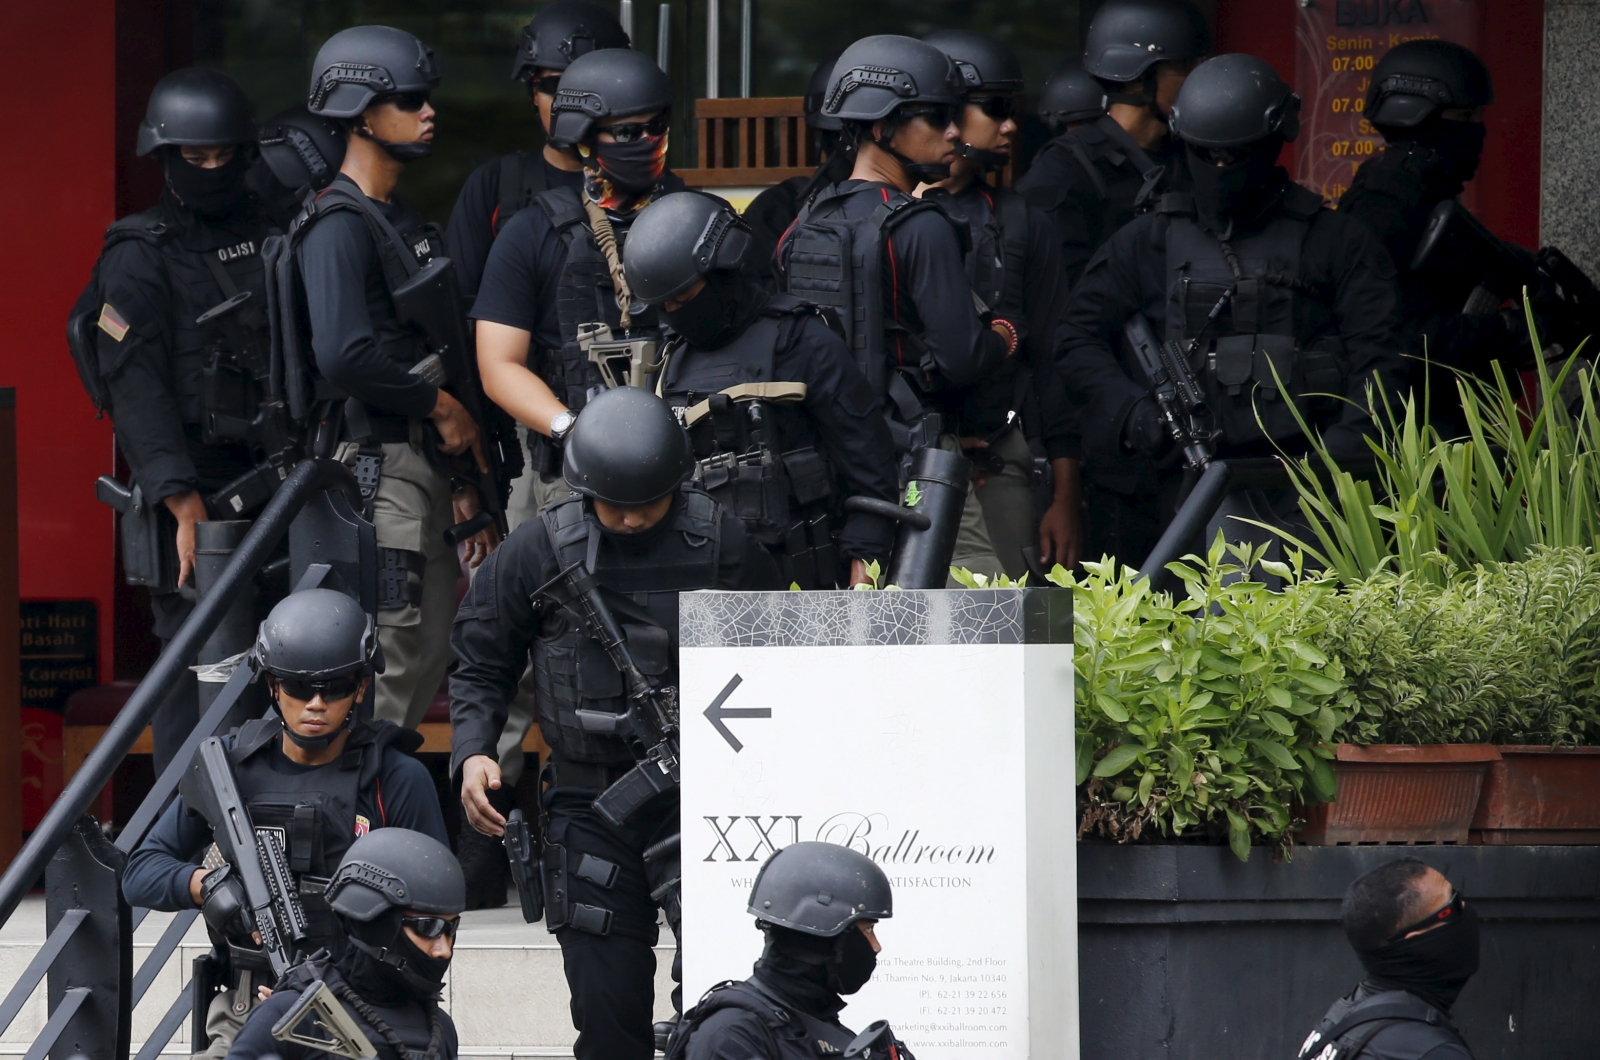 Indonesia: Police shoot suspected Islamist militant after attack on officials1600 x 1060